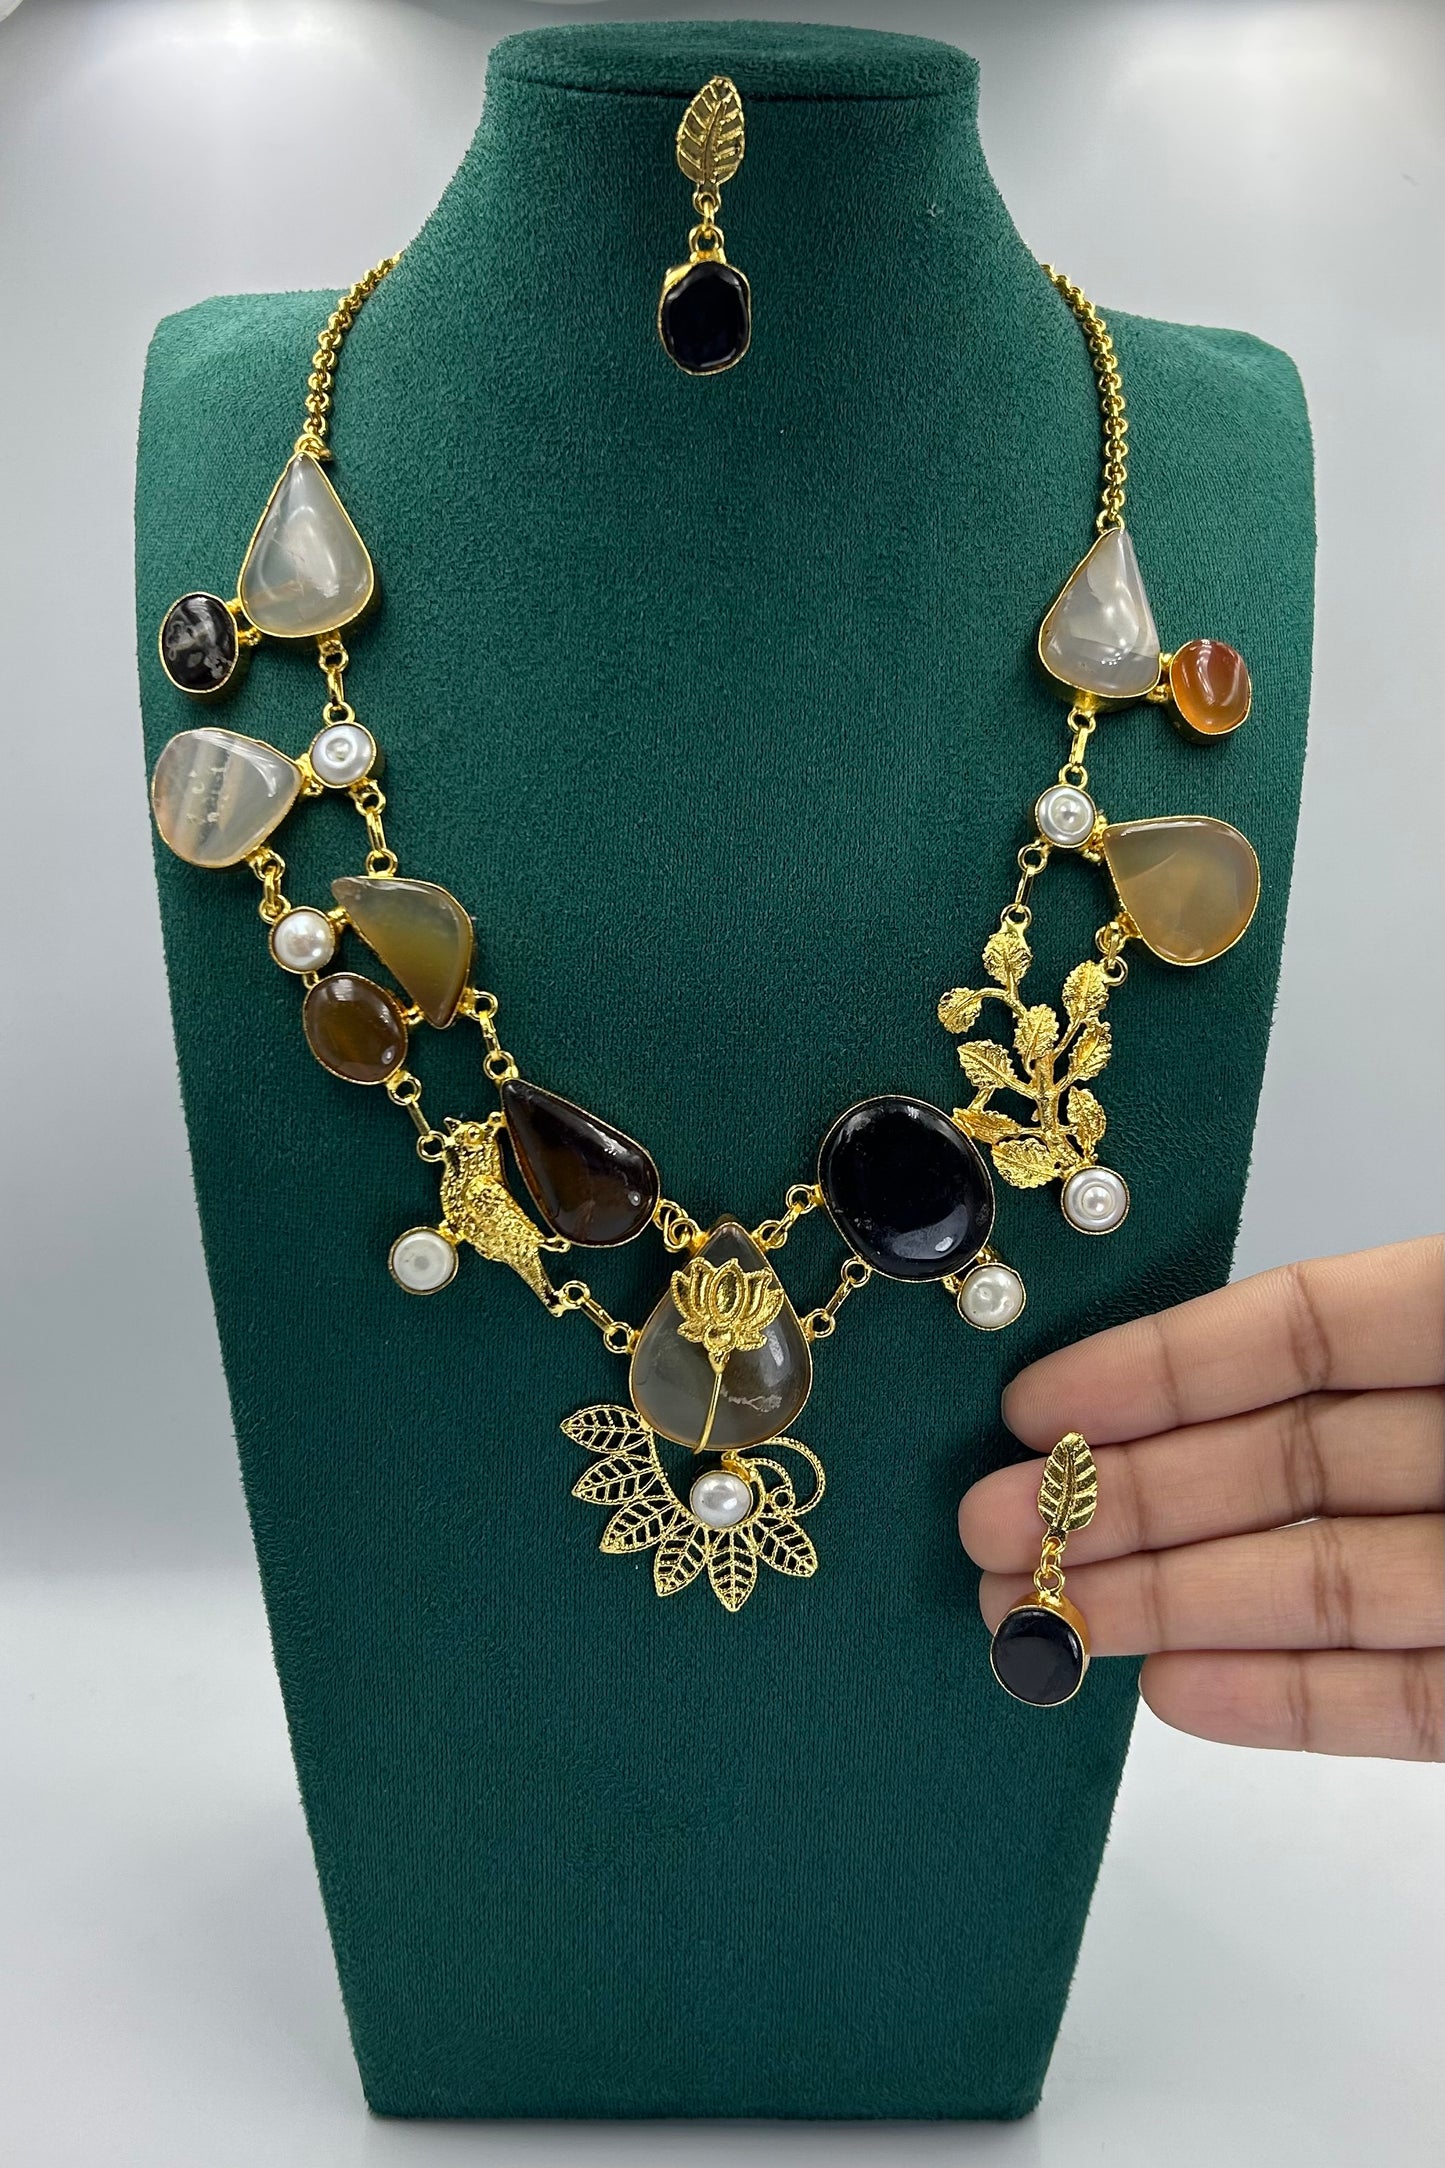 Isma Natural stones Statement Necklace